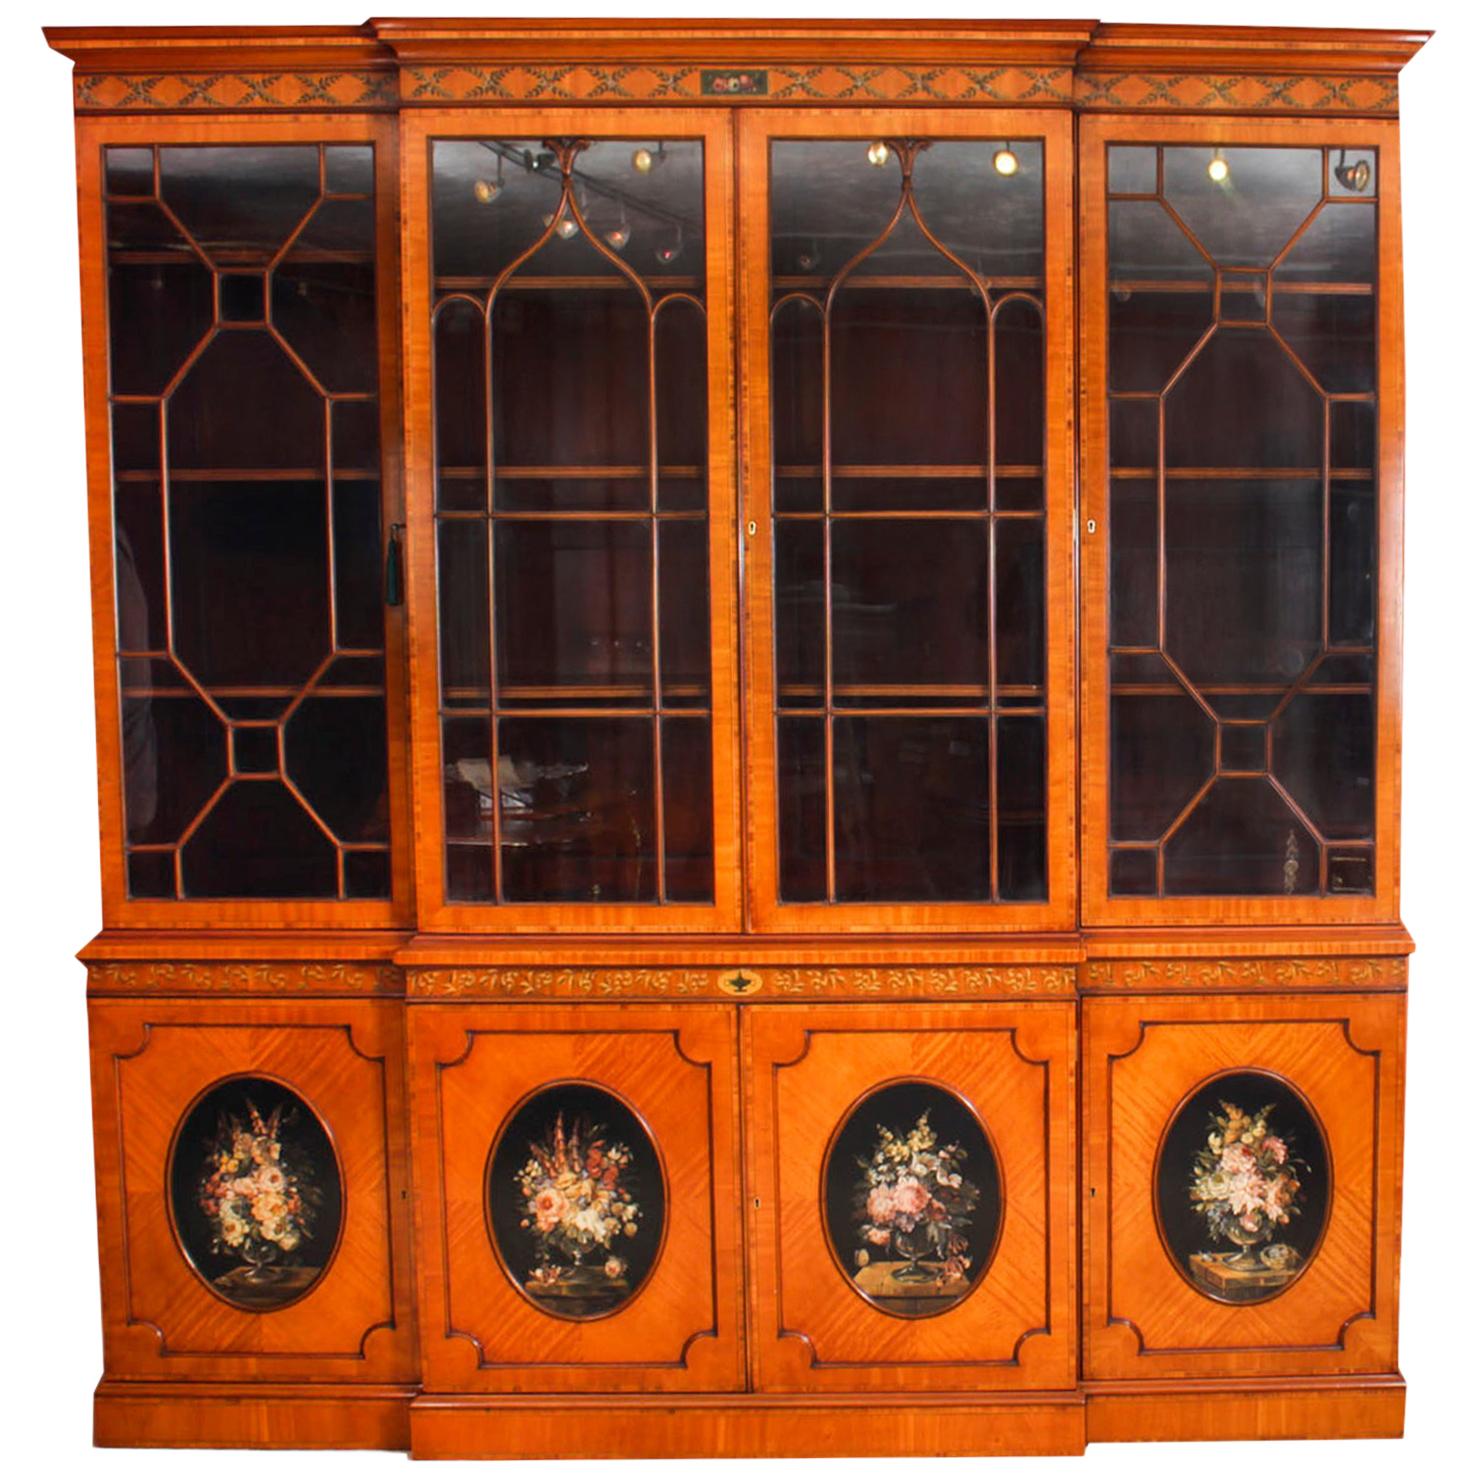 Antique English Sheraton Revival Satinwood Breakfront Bookcase, 19th Century